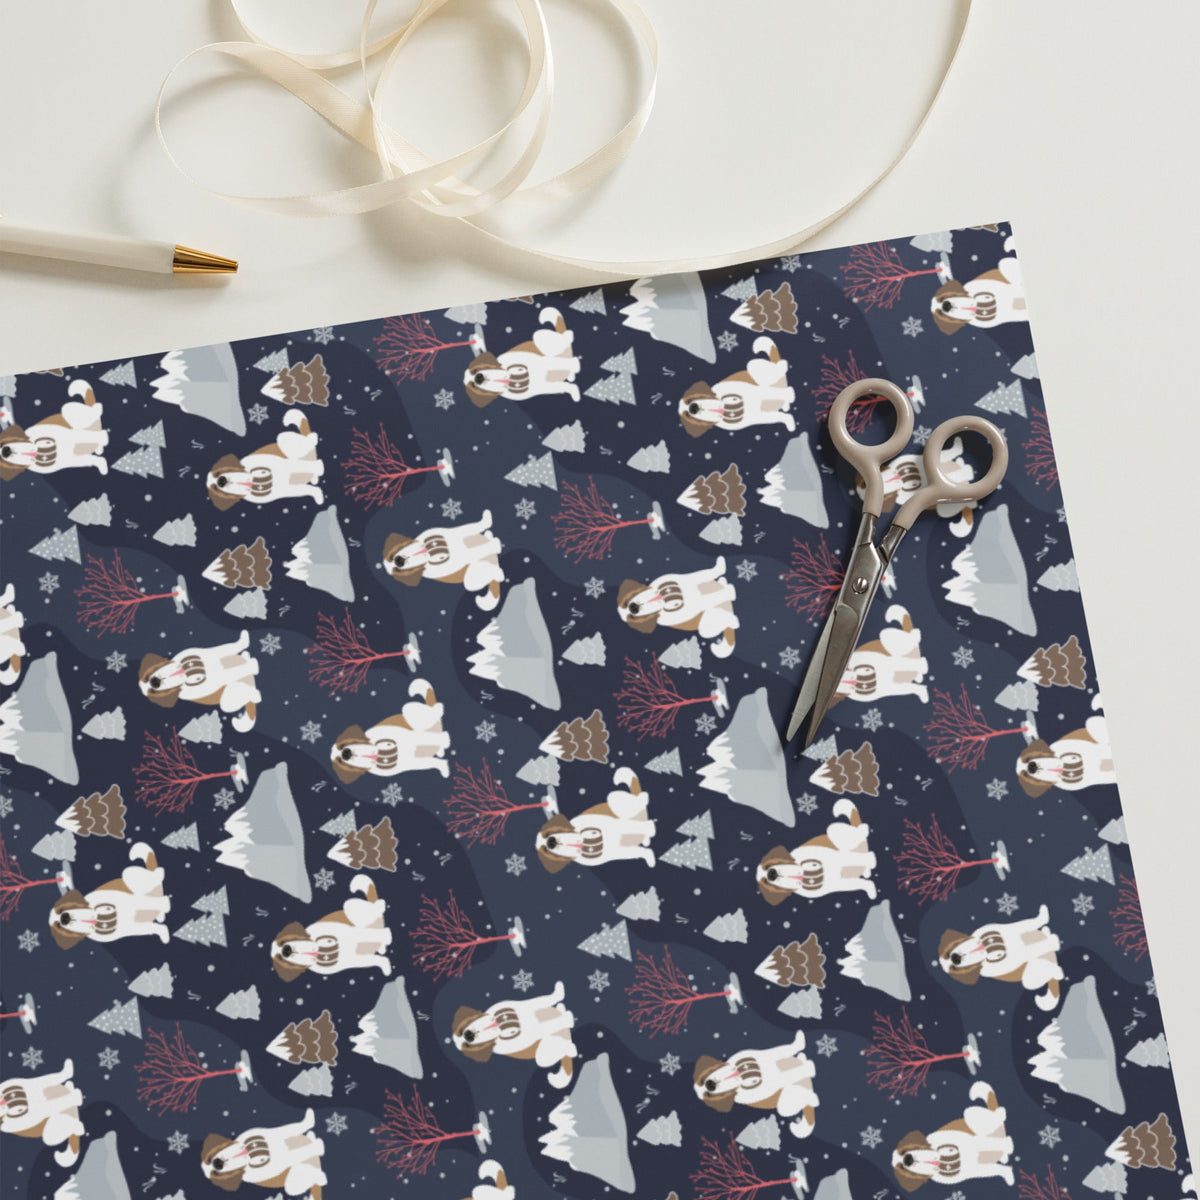 Reindeer Saint Bernard Dog Christmas Wrapping Paper Sheets by Lucy + Norman